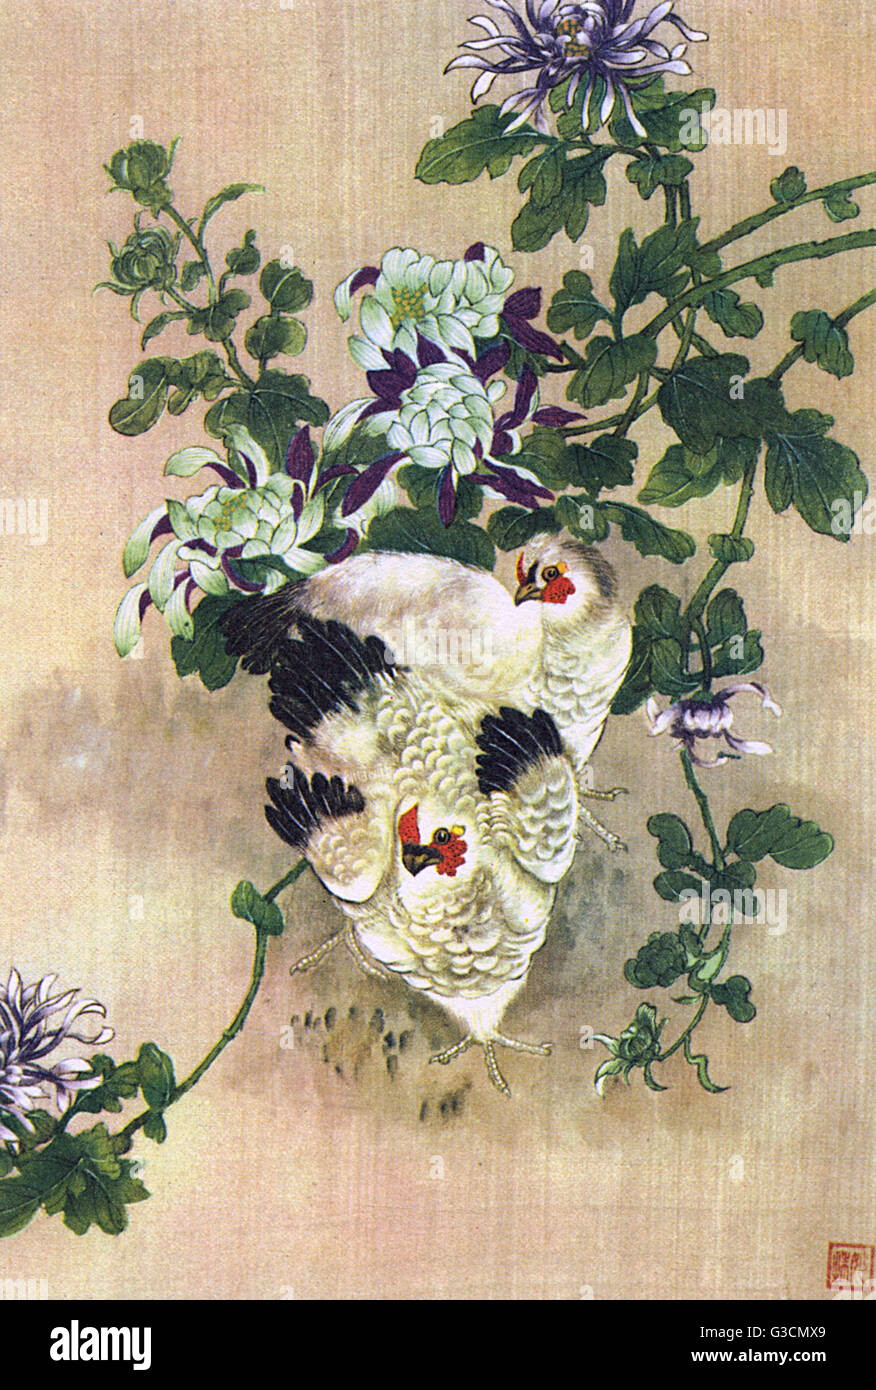 Chinese art, two birds on a branch with white flowers.      Date: early 20th century Stock Photo